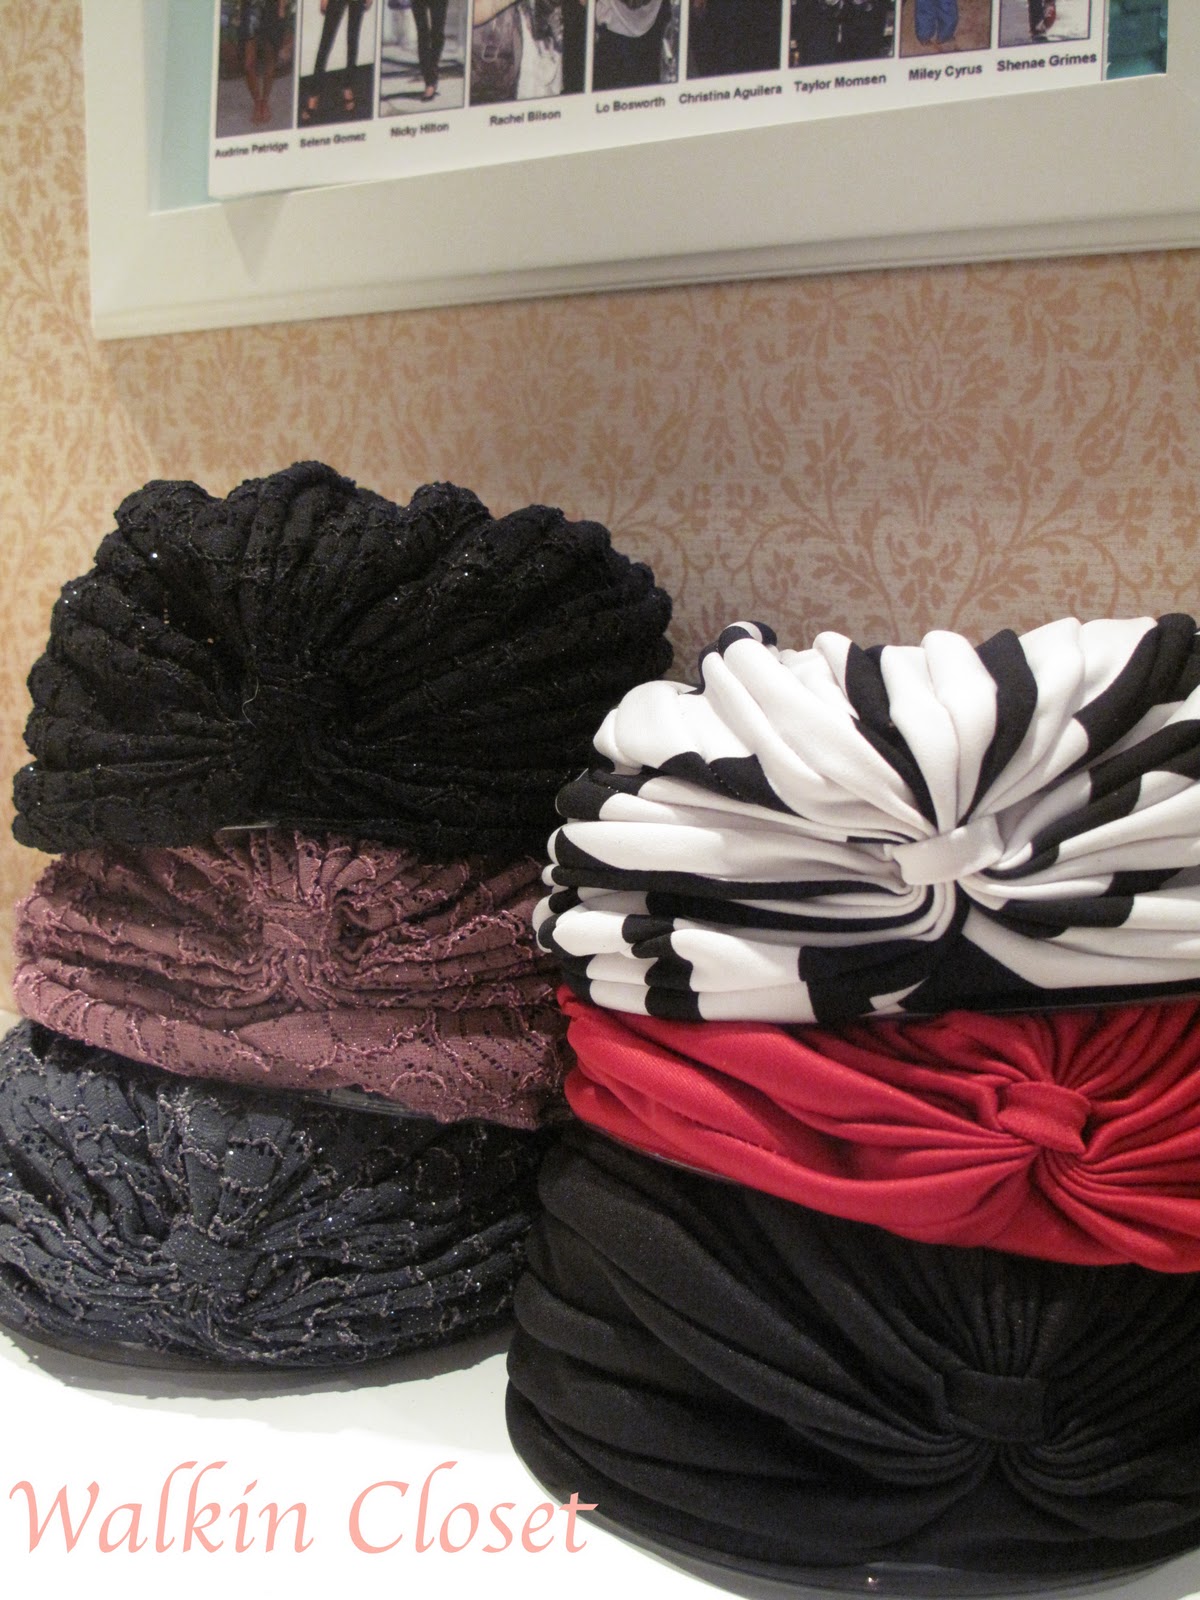 New Lace Turbans from CYKAS!